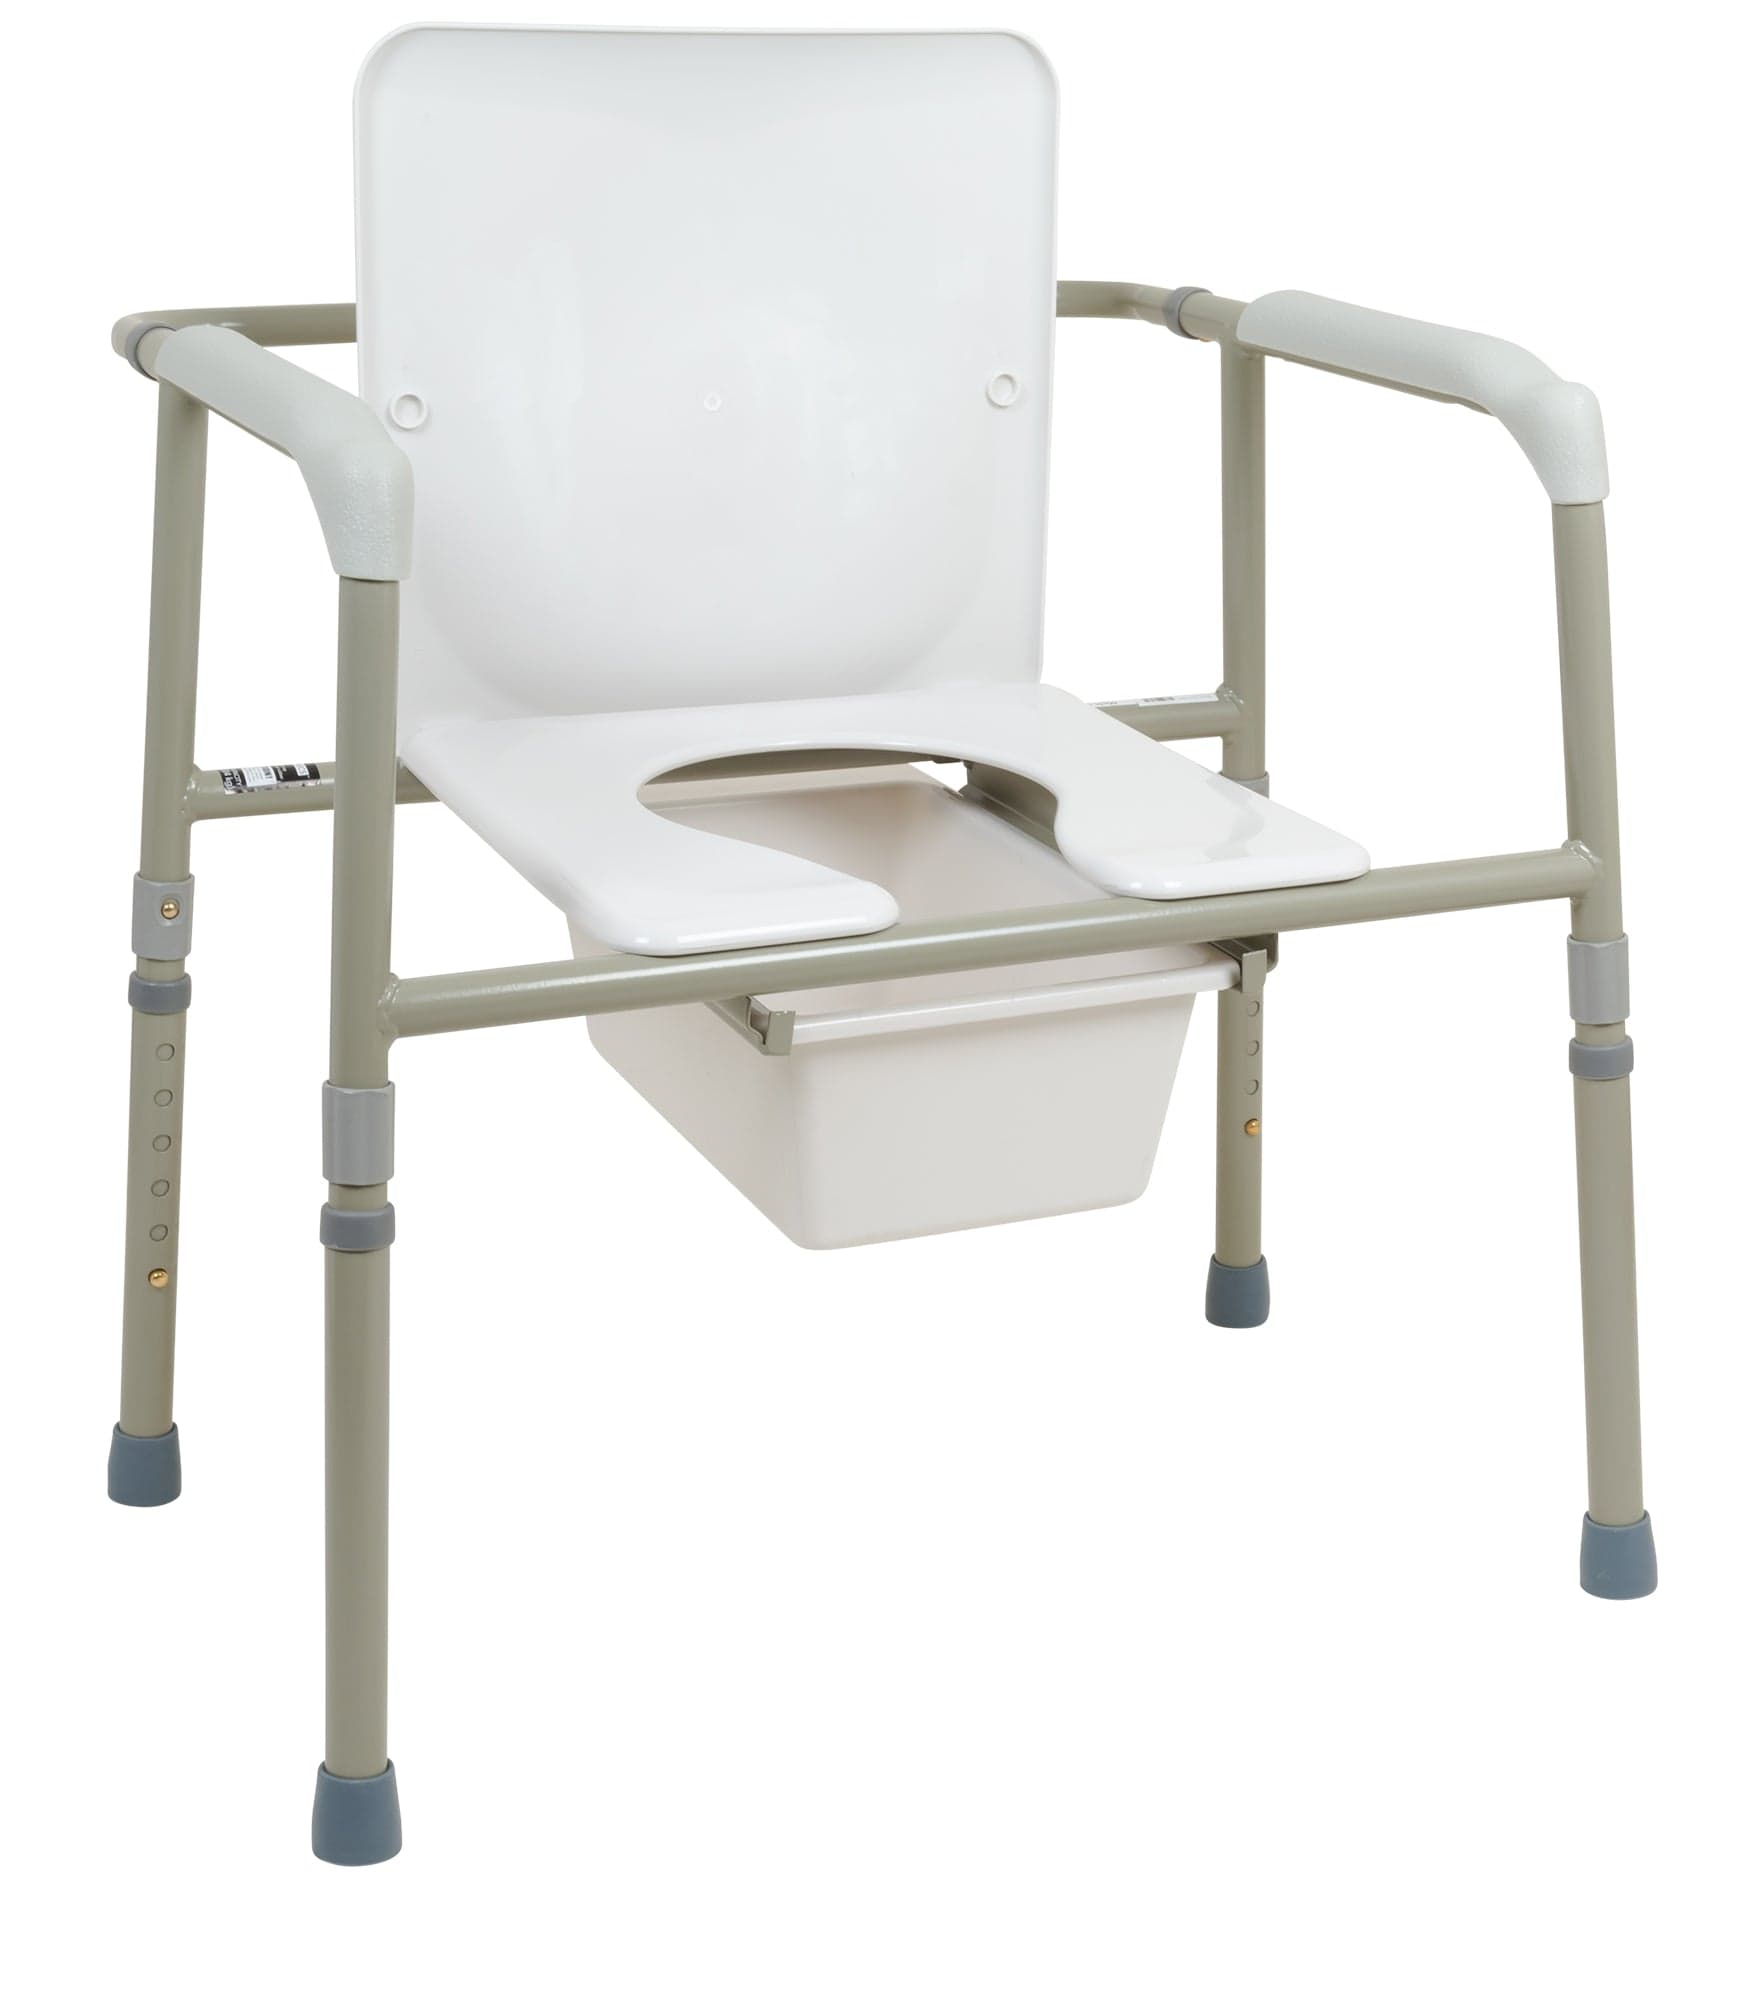 Compass Health Compass Health ProBasics Bariatric Three-in-One Commode, 450lb Weight Capacity BSB31C